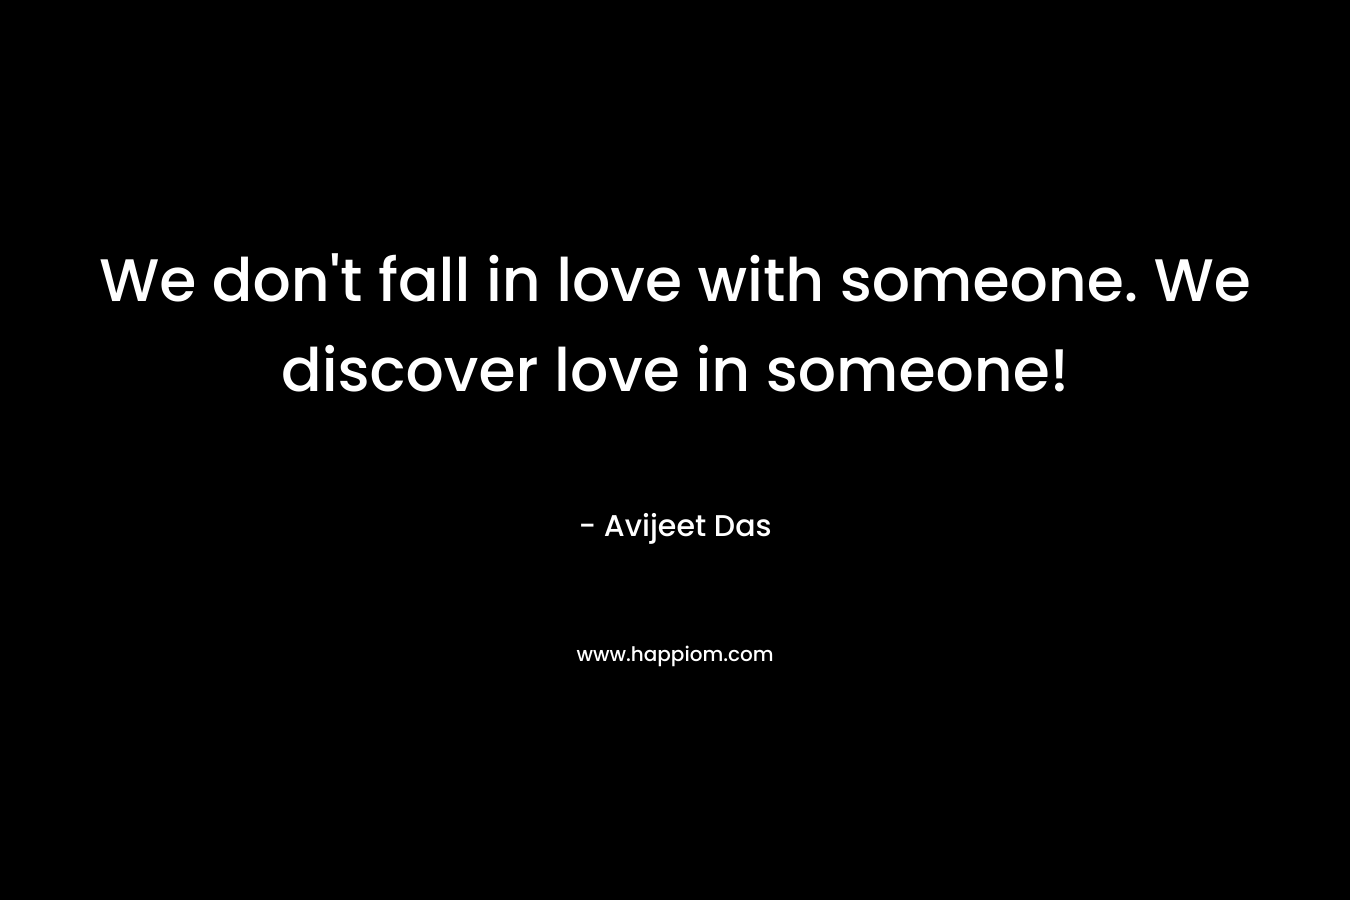 We don't fall in love with someone. We discover love in someone!